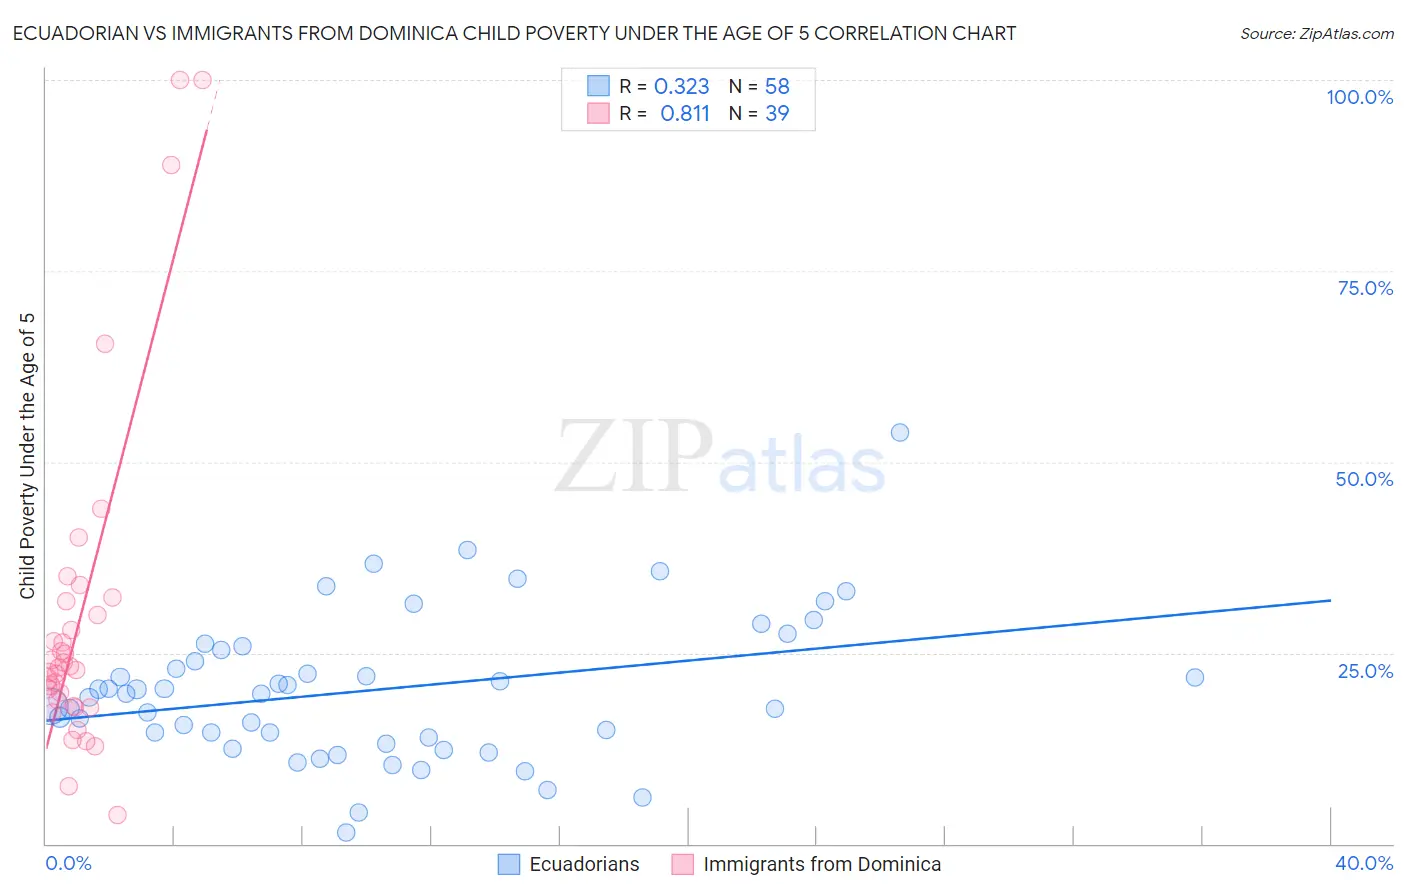 Ecuadorian vs Immigrants from Dominica Child Poverty Under the Age of 5